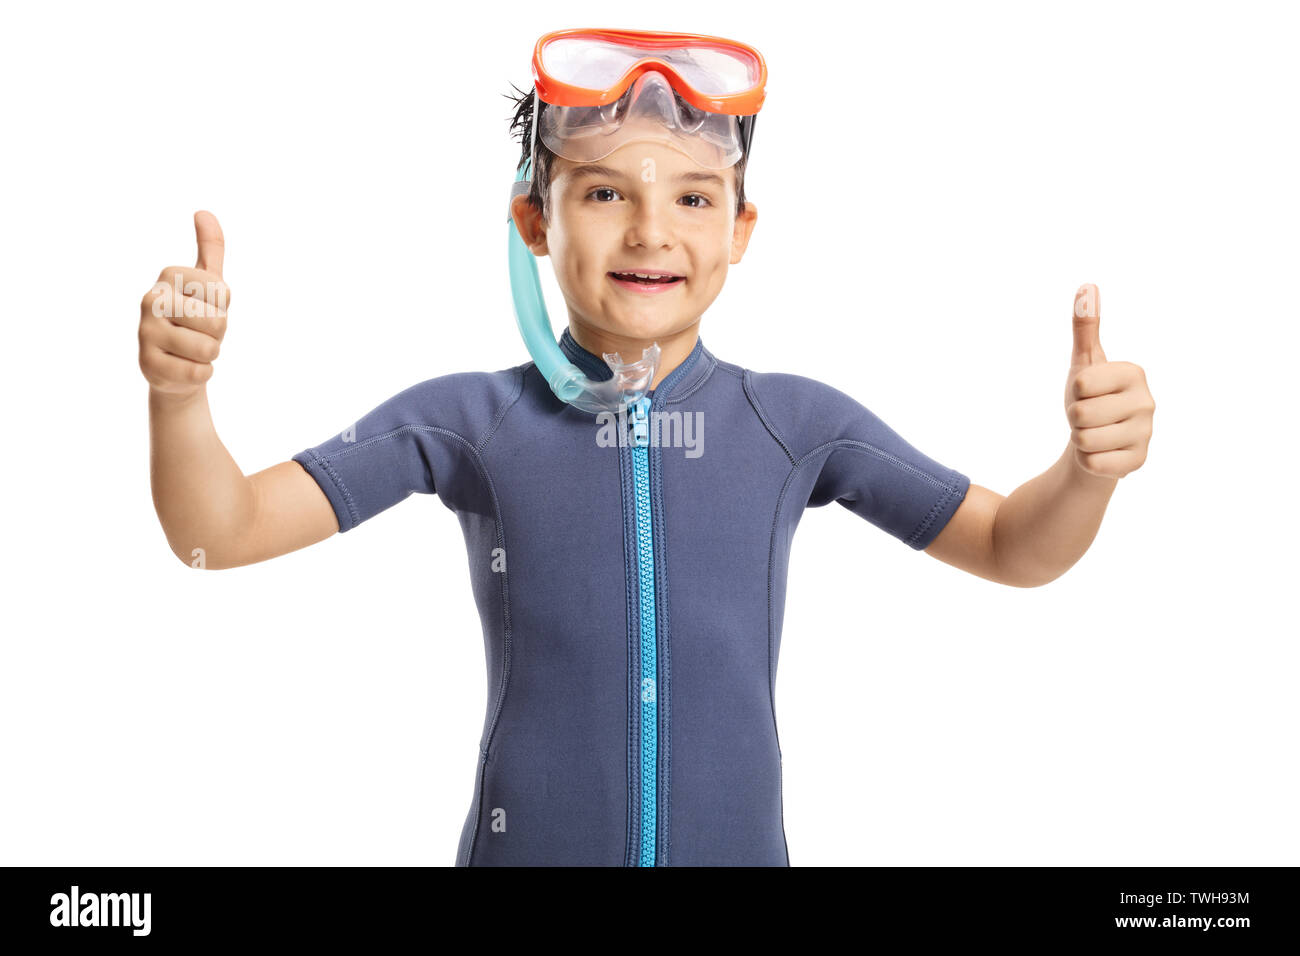 Smiling little boy with a snorkeling mask showing thumbs up isolated on white background Stock Photo